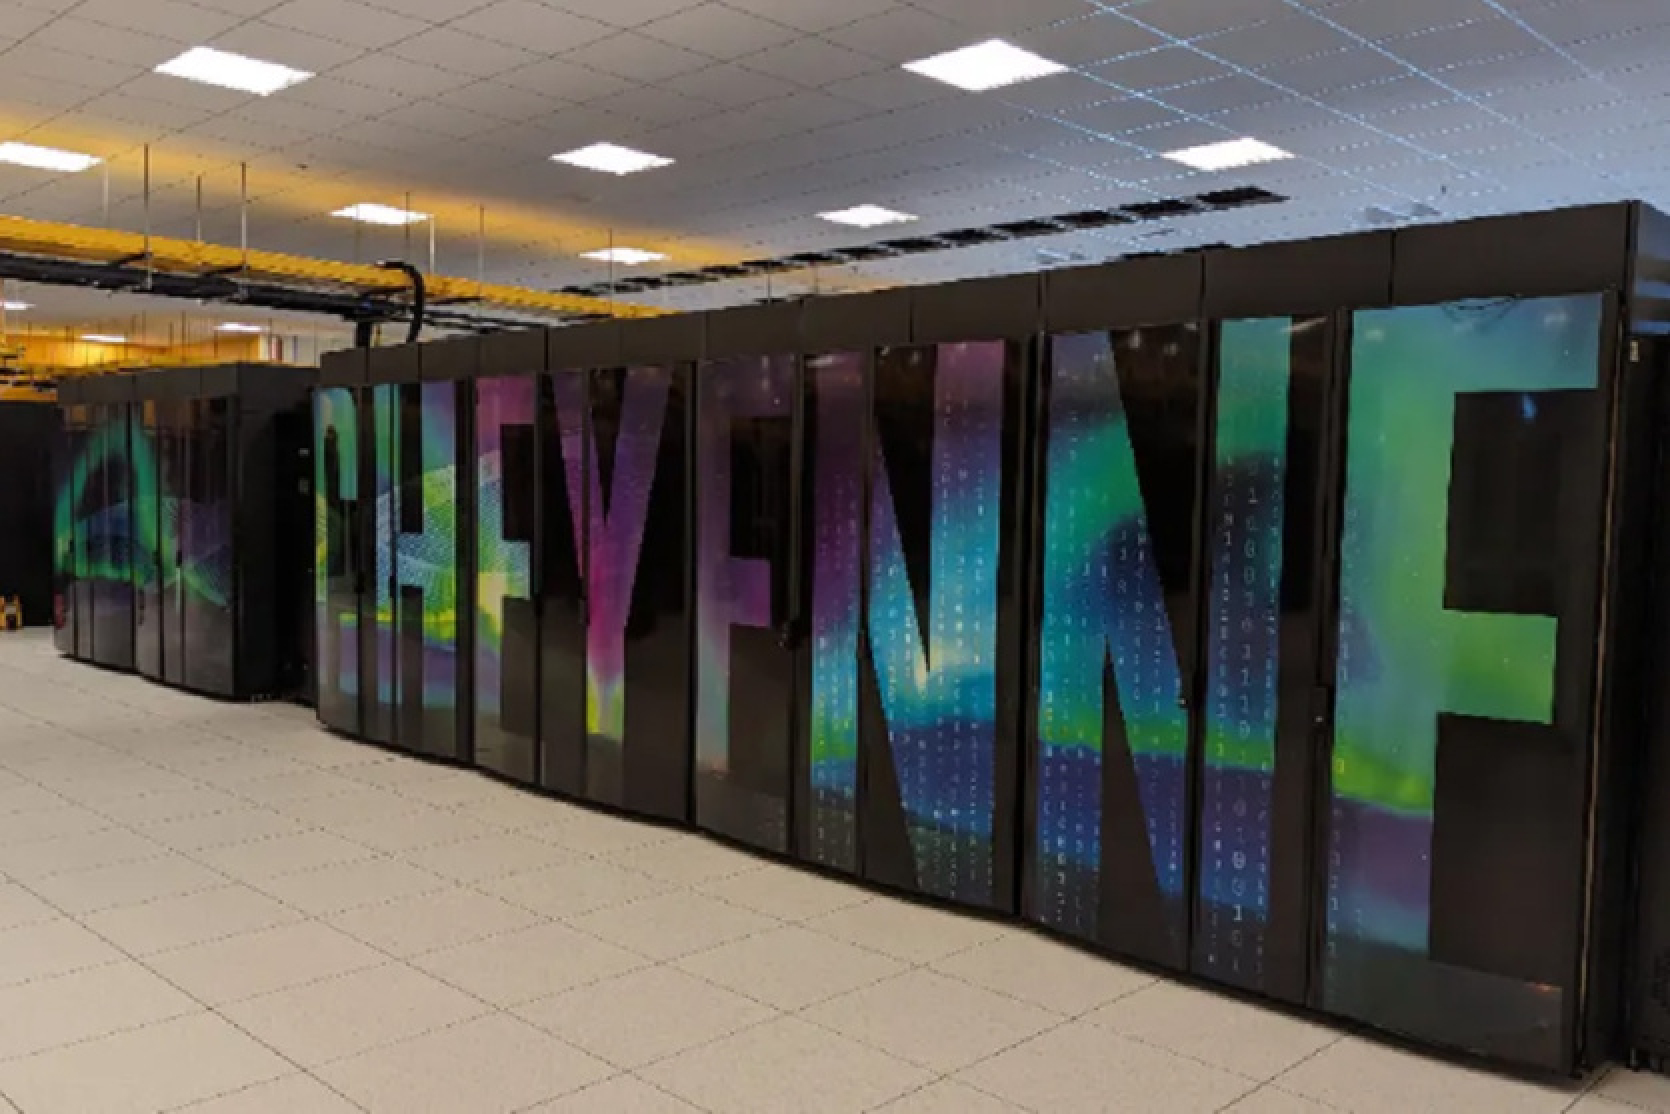 A supercomputer with 8,064 Intel Xeon chips and 313.3 TB of RAM is up for auction in the US - the bid is already over $280k.